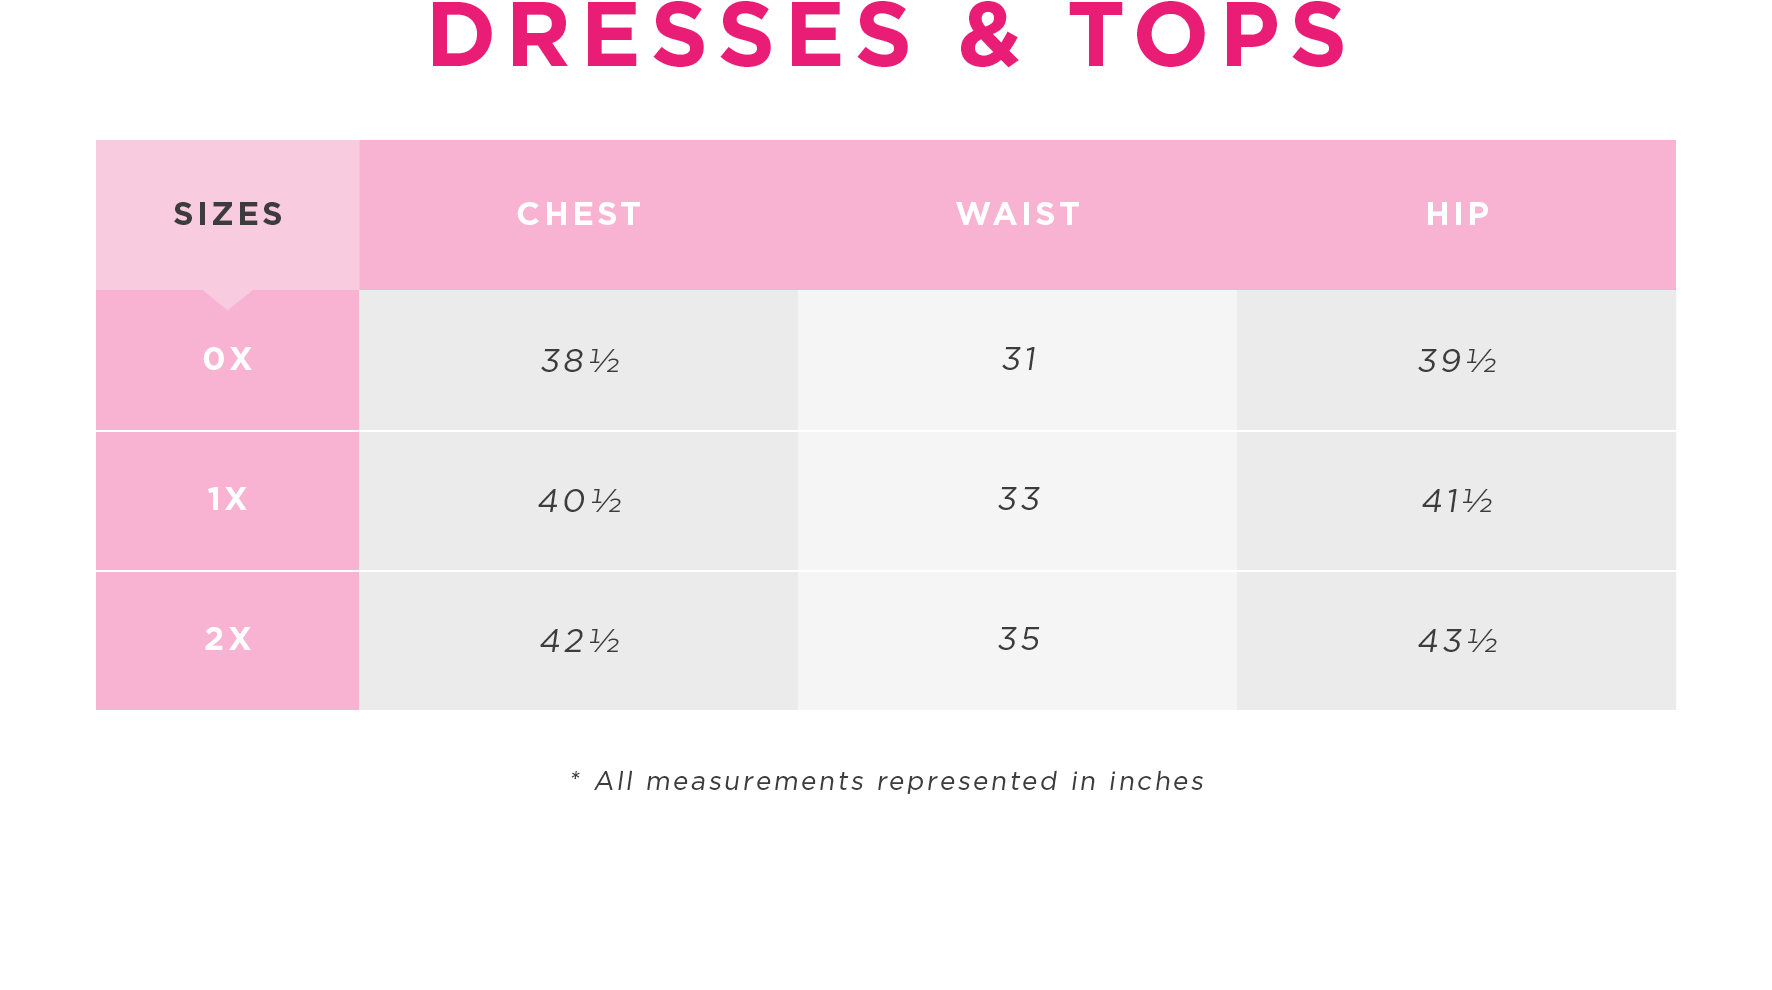 Plus Size Chart For Women